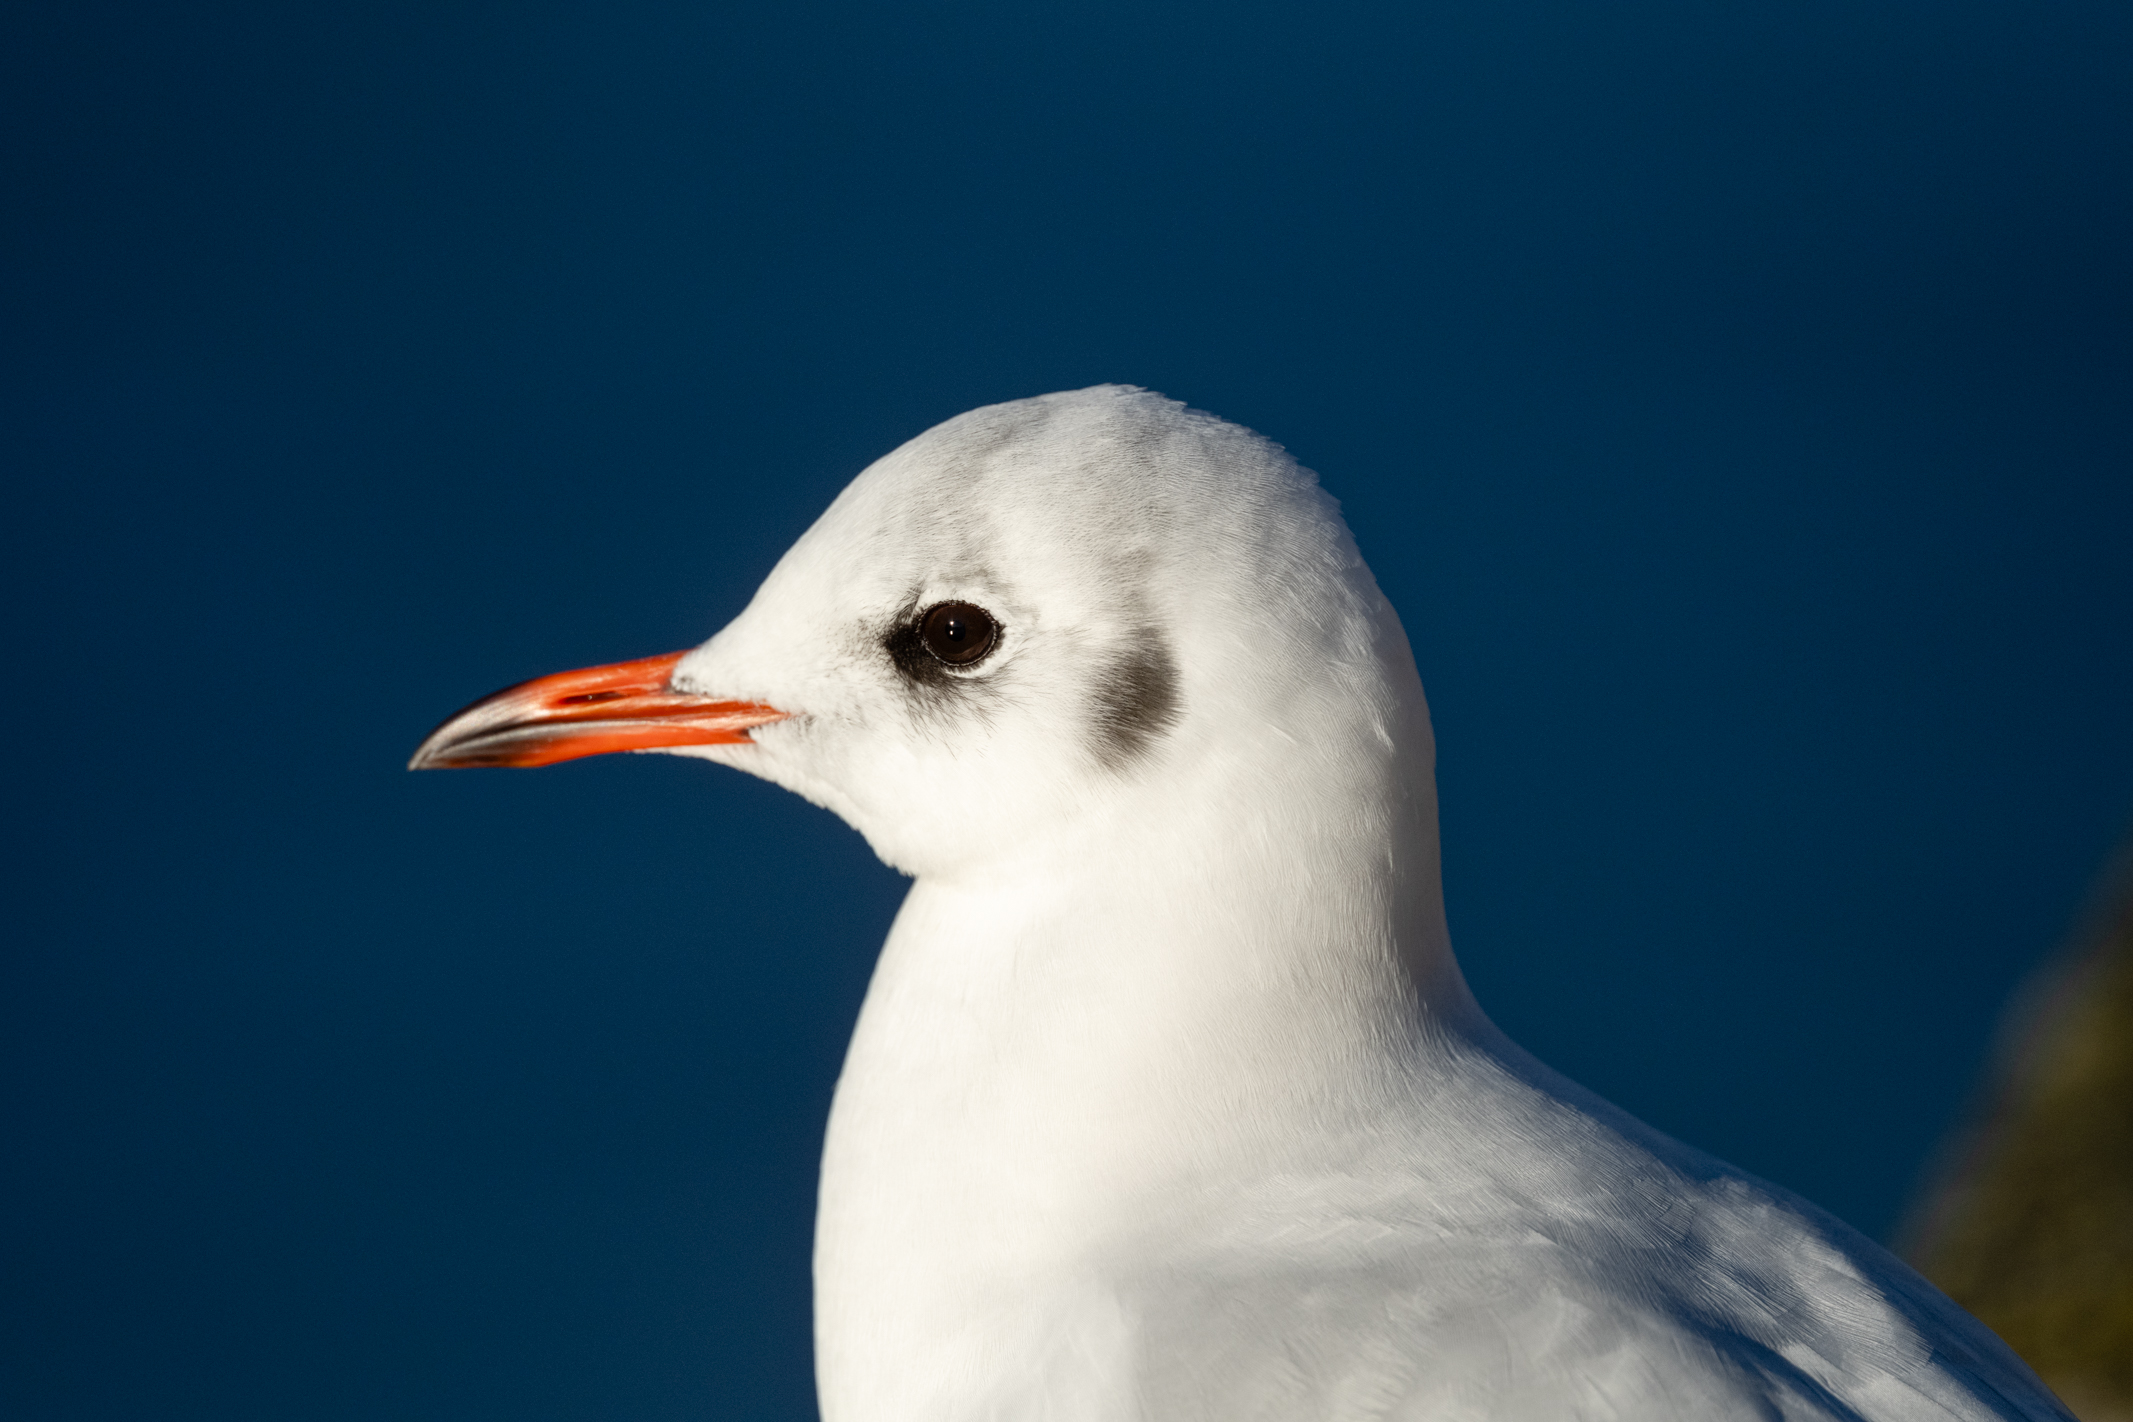 Close-up of a gull's head taken with a Nikkor Z 600mm f/6.3 VR S